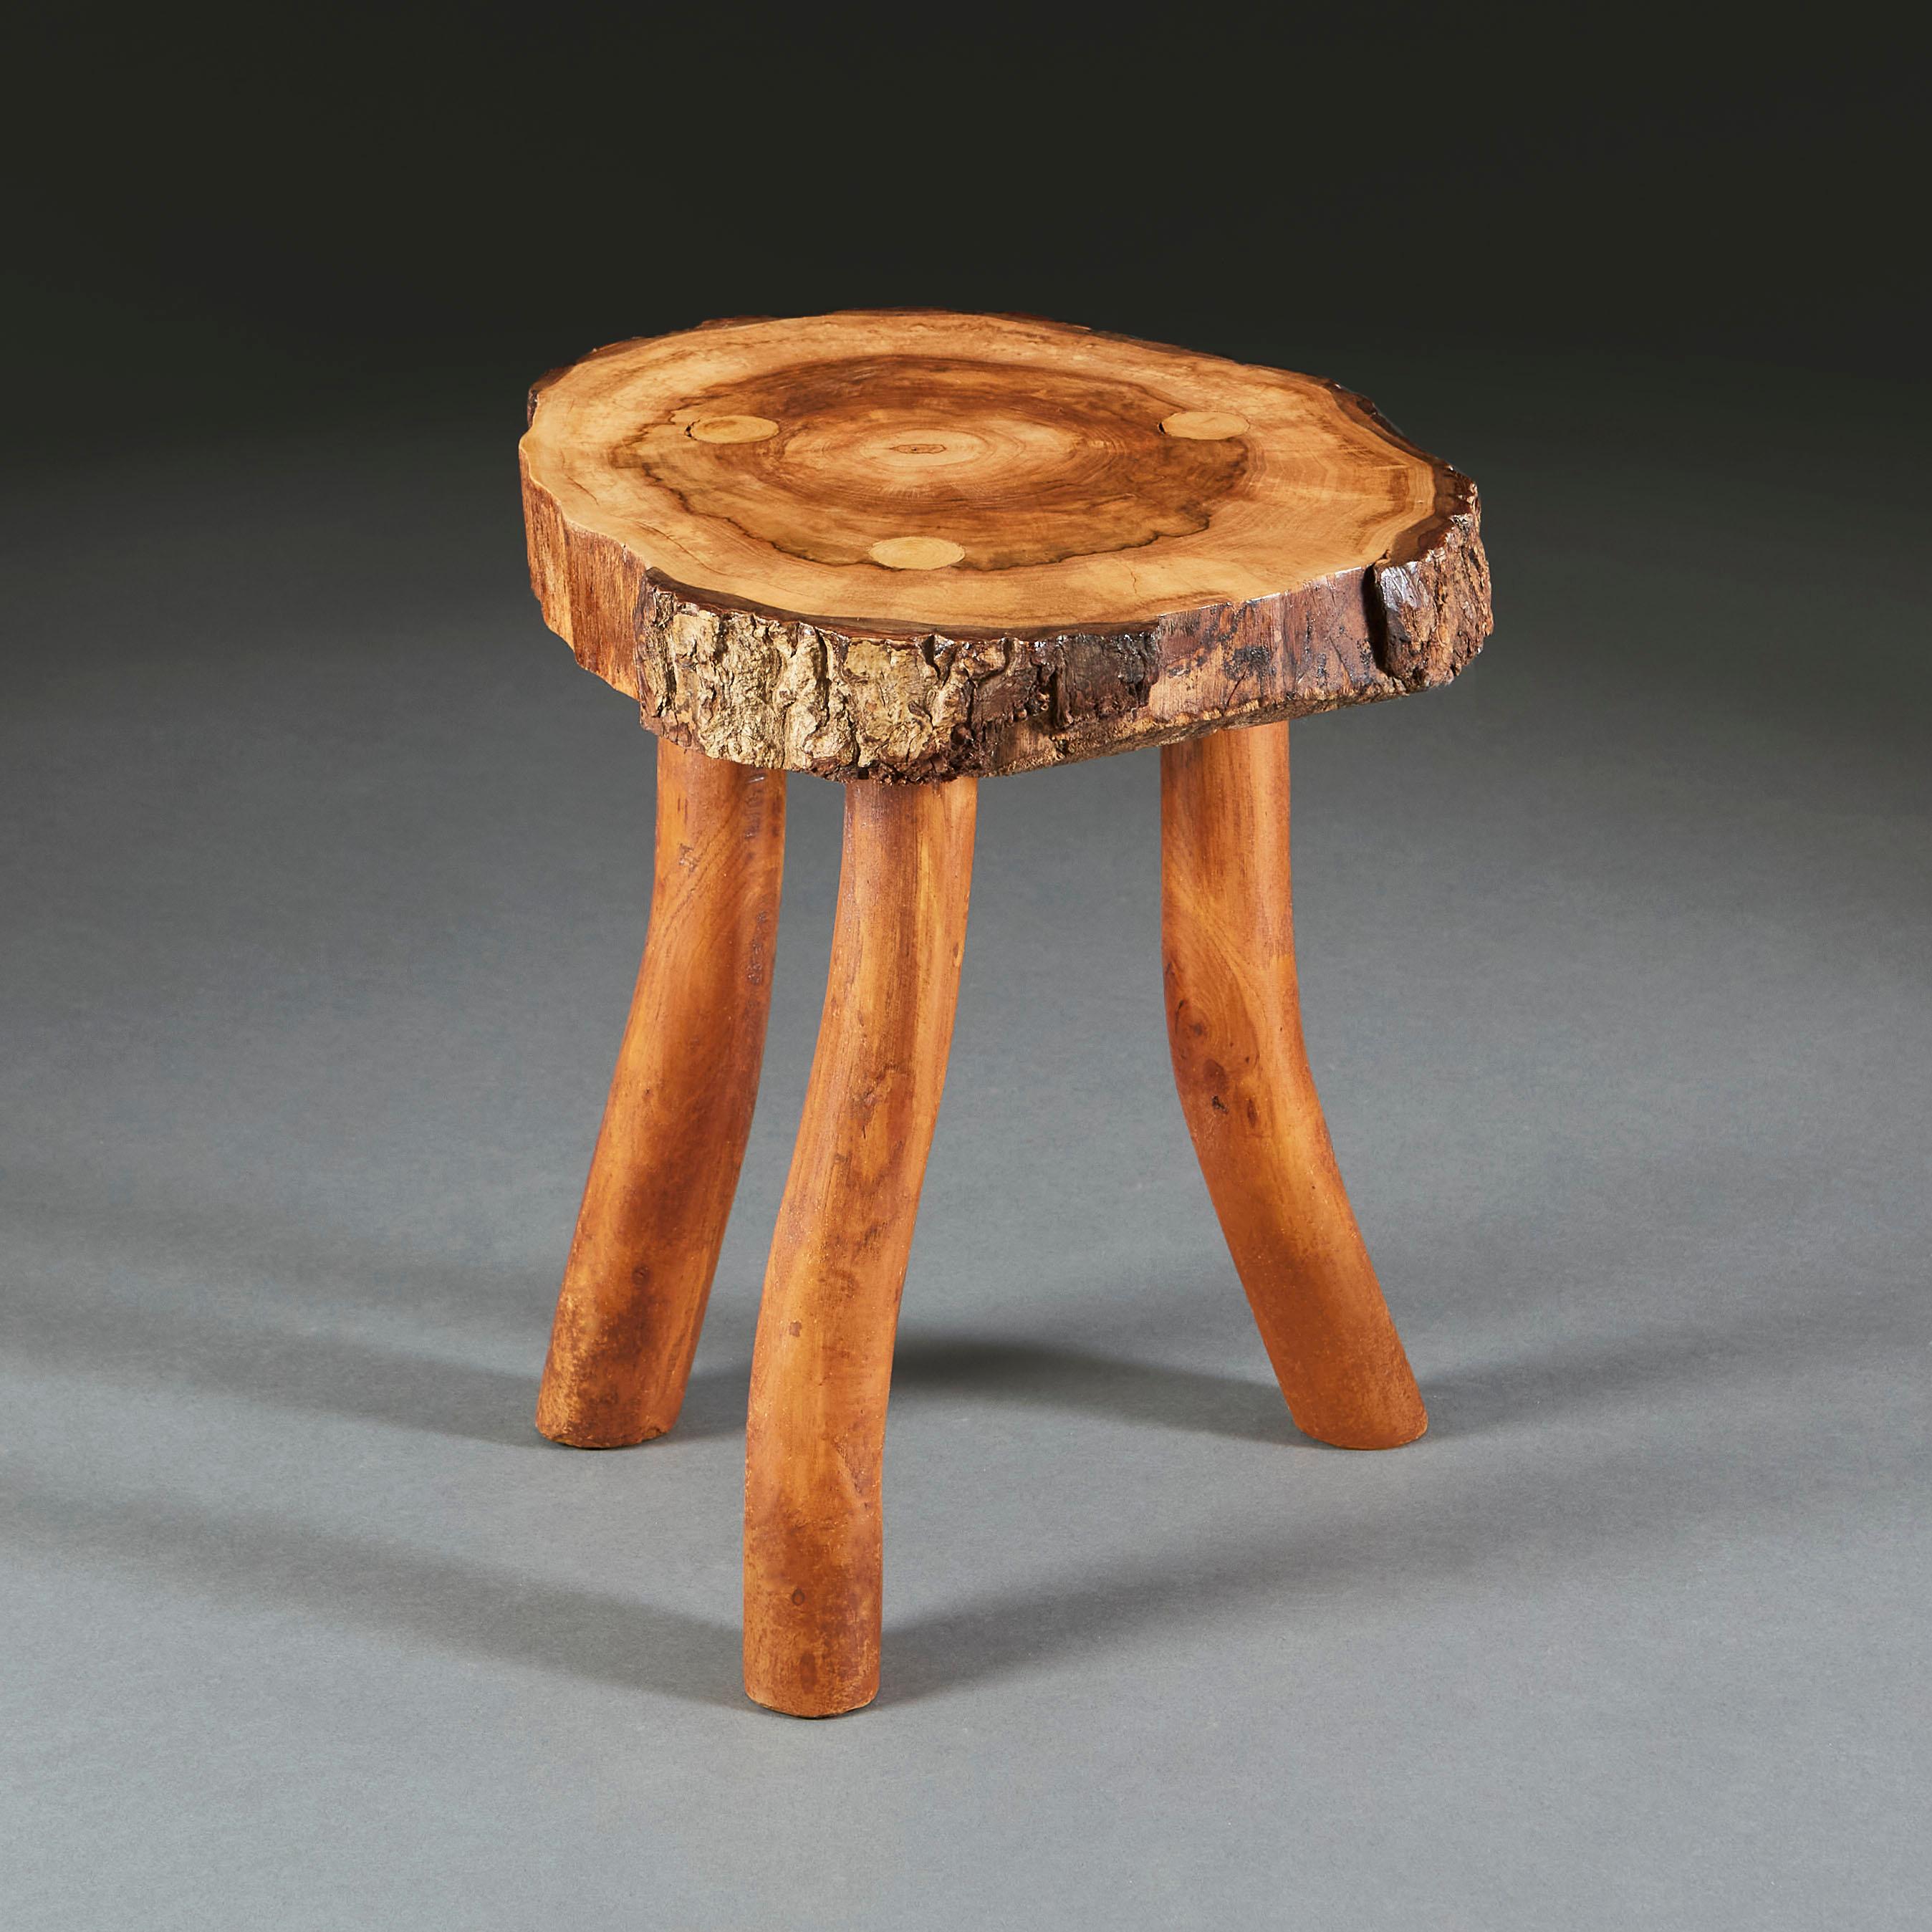 A French walnut root wood tripod table, showing annual growth rings and with natural bark edge.